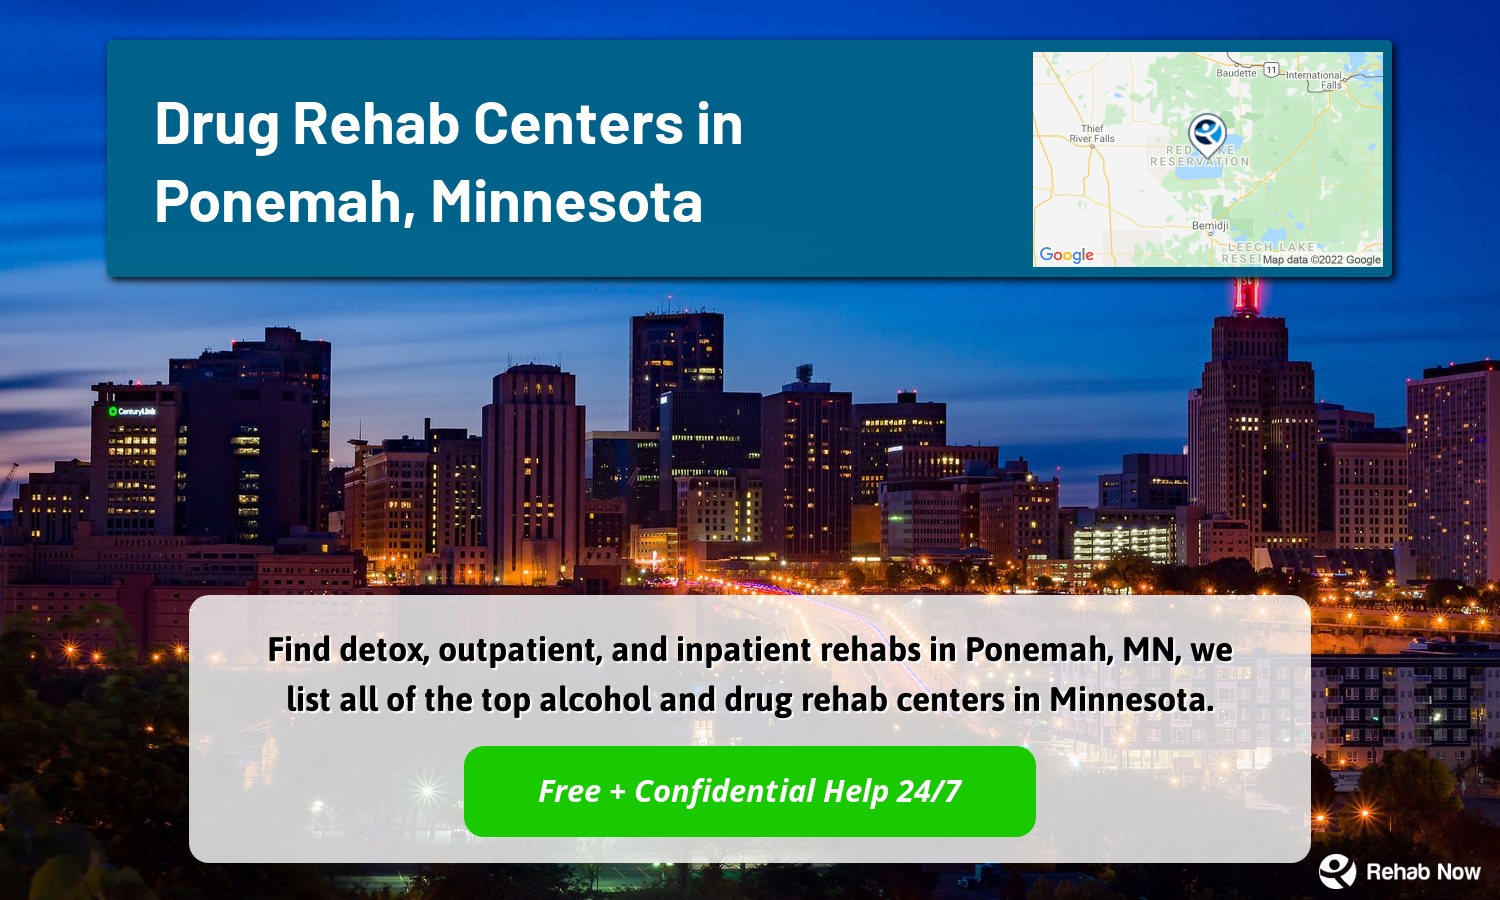 Find detox, outpatient, and inpatient rehabs in Ponemah, MN, we list all of the top alcohol and drug rehab centers in Minnesota.